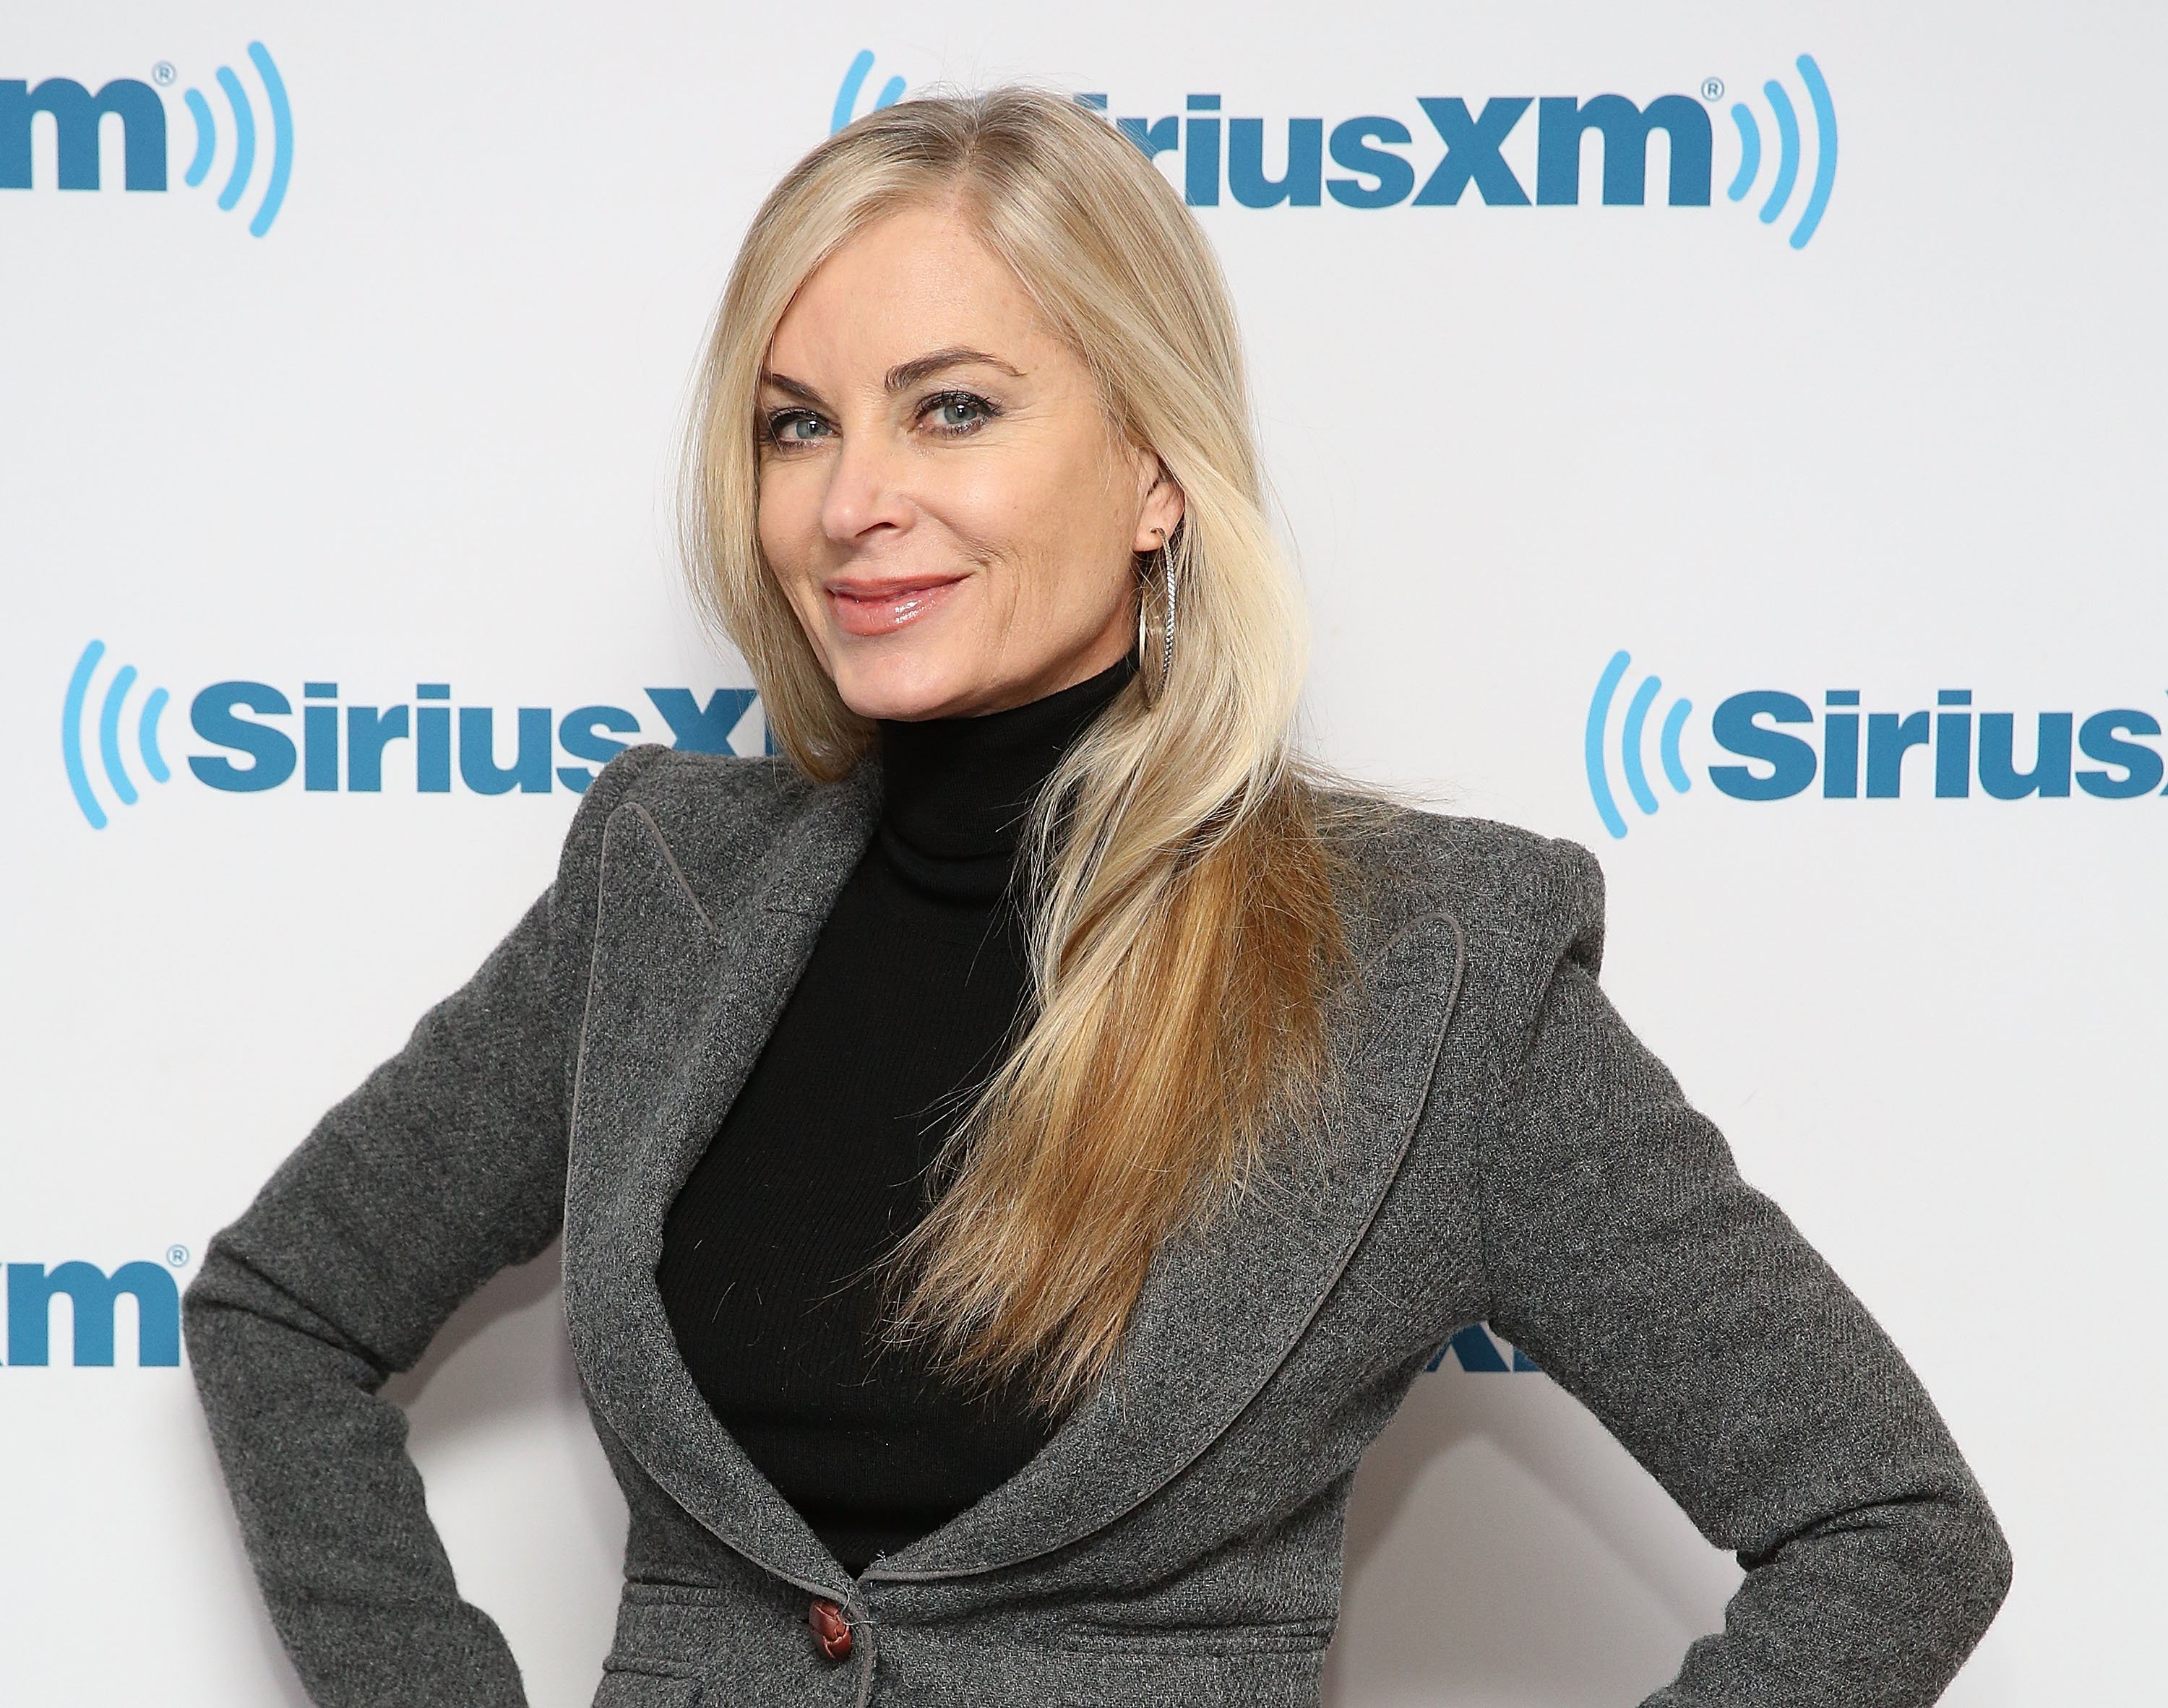 'The Young and the Restless' actor Eileen Davidson wearing a grey jacket and black shirt, stands in front of a siriusxm backdrop.